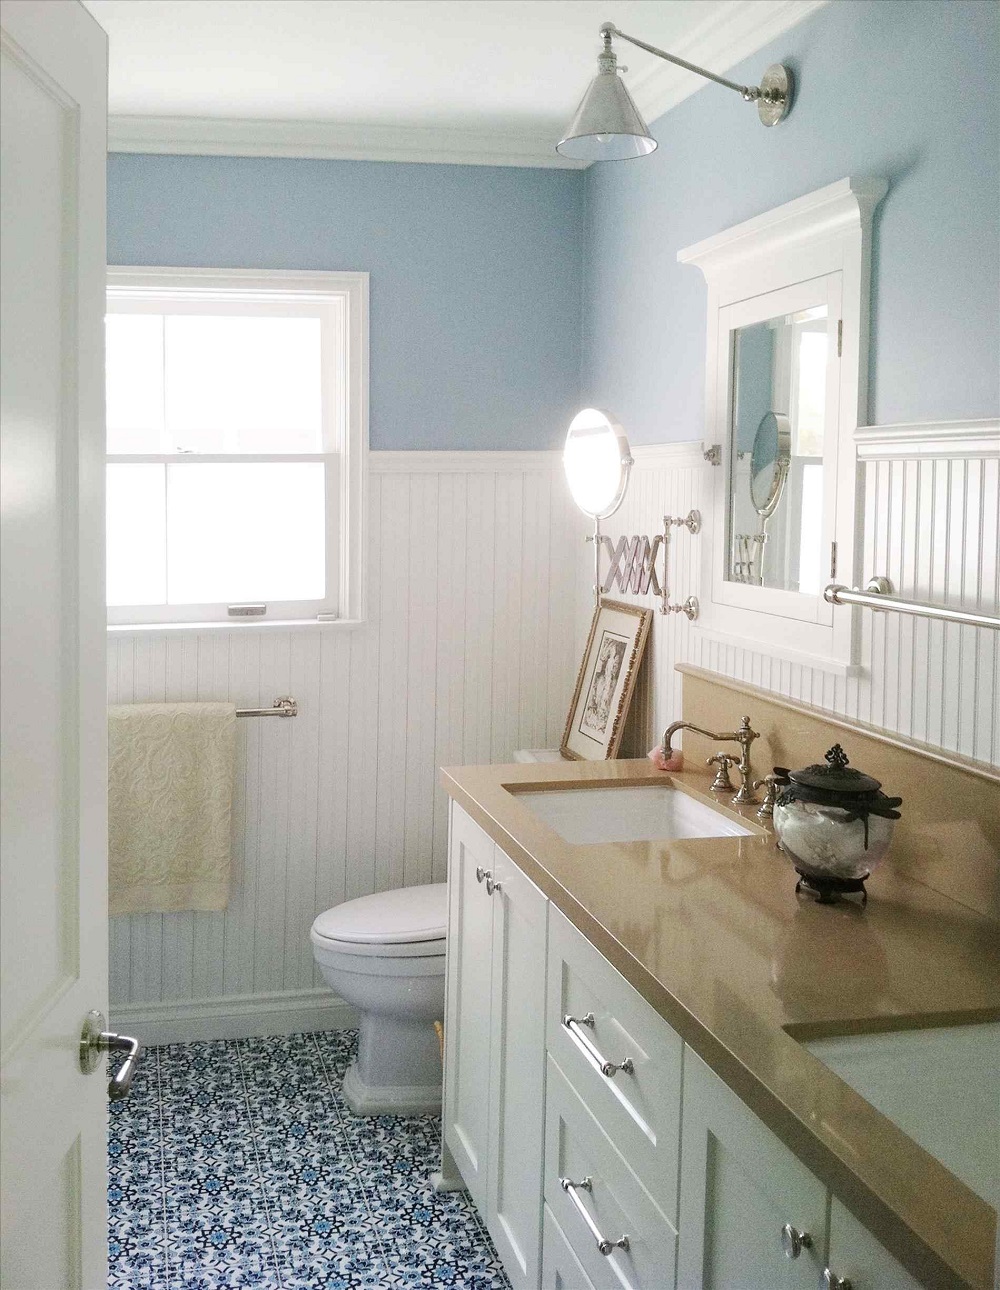 How you can take full advantage of these wainscoting